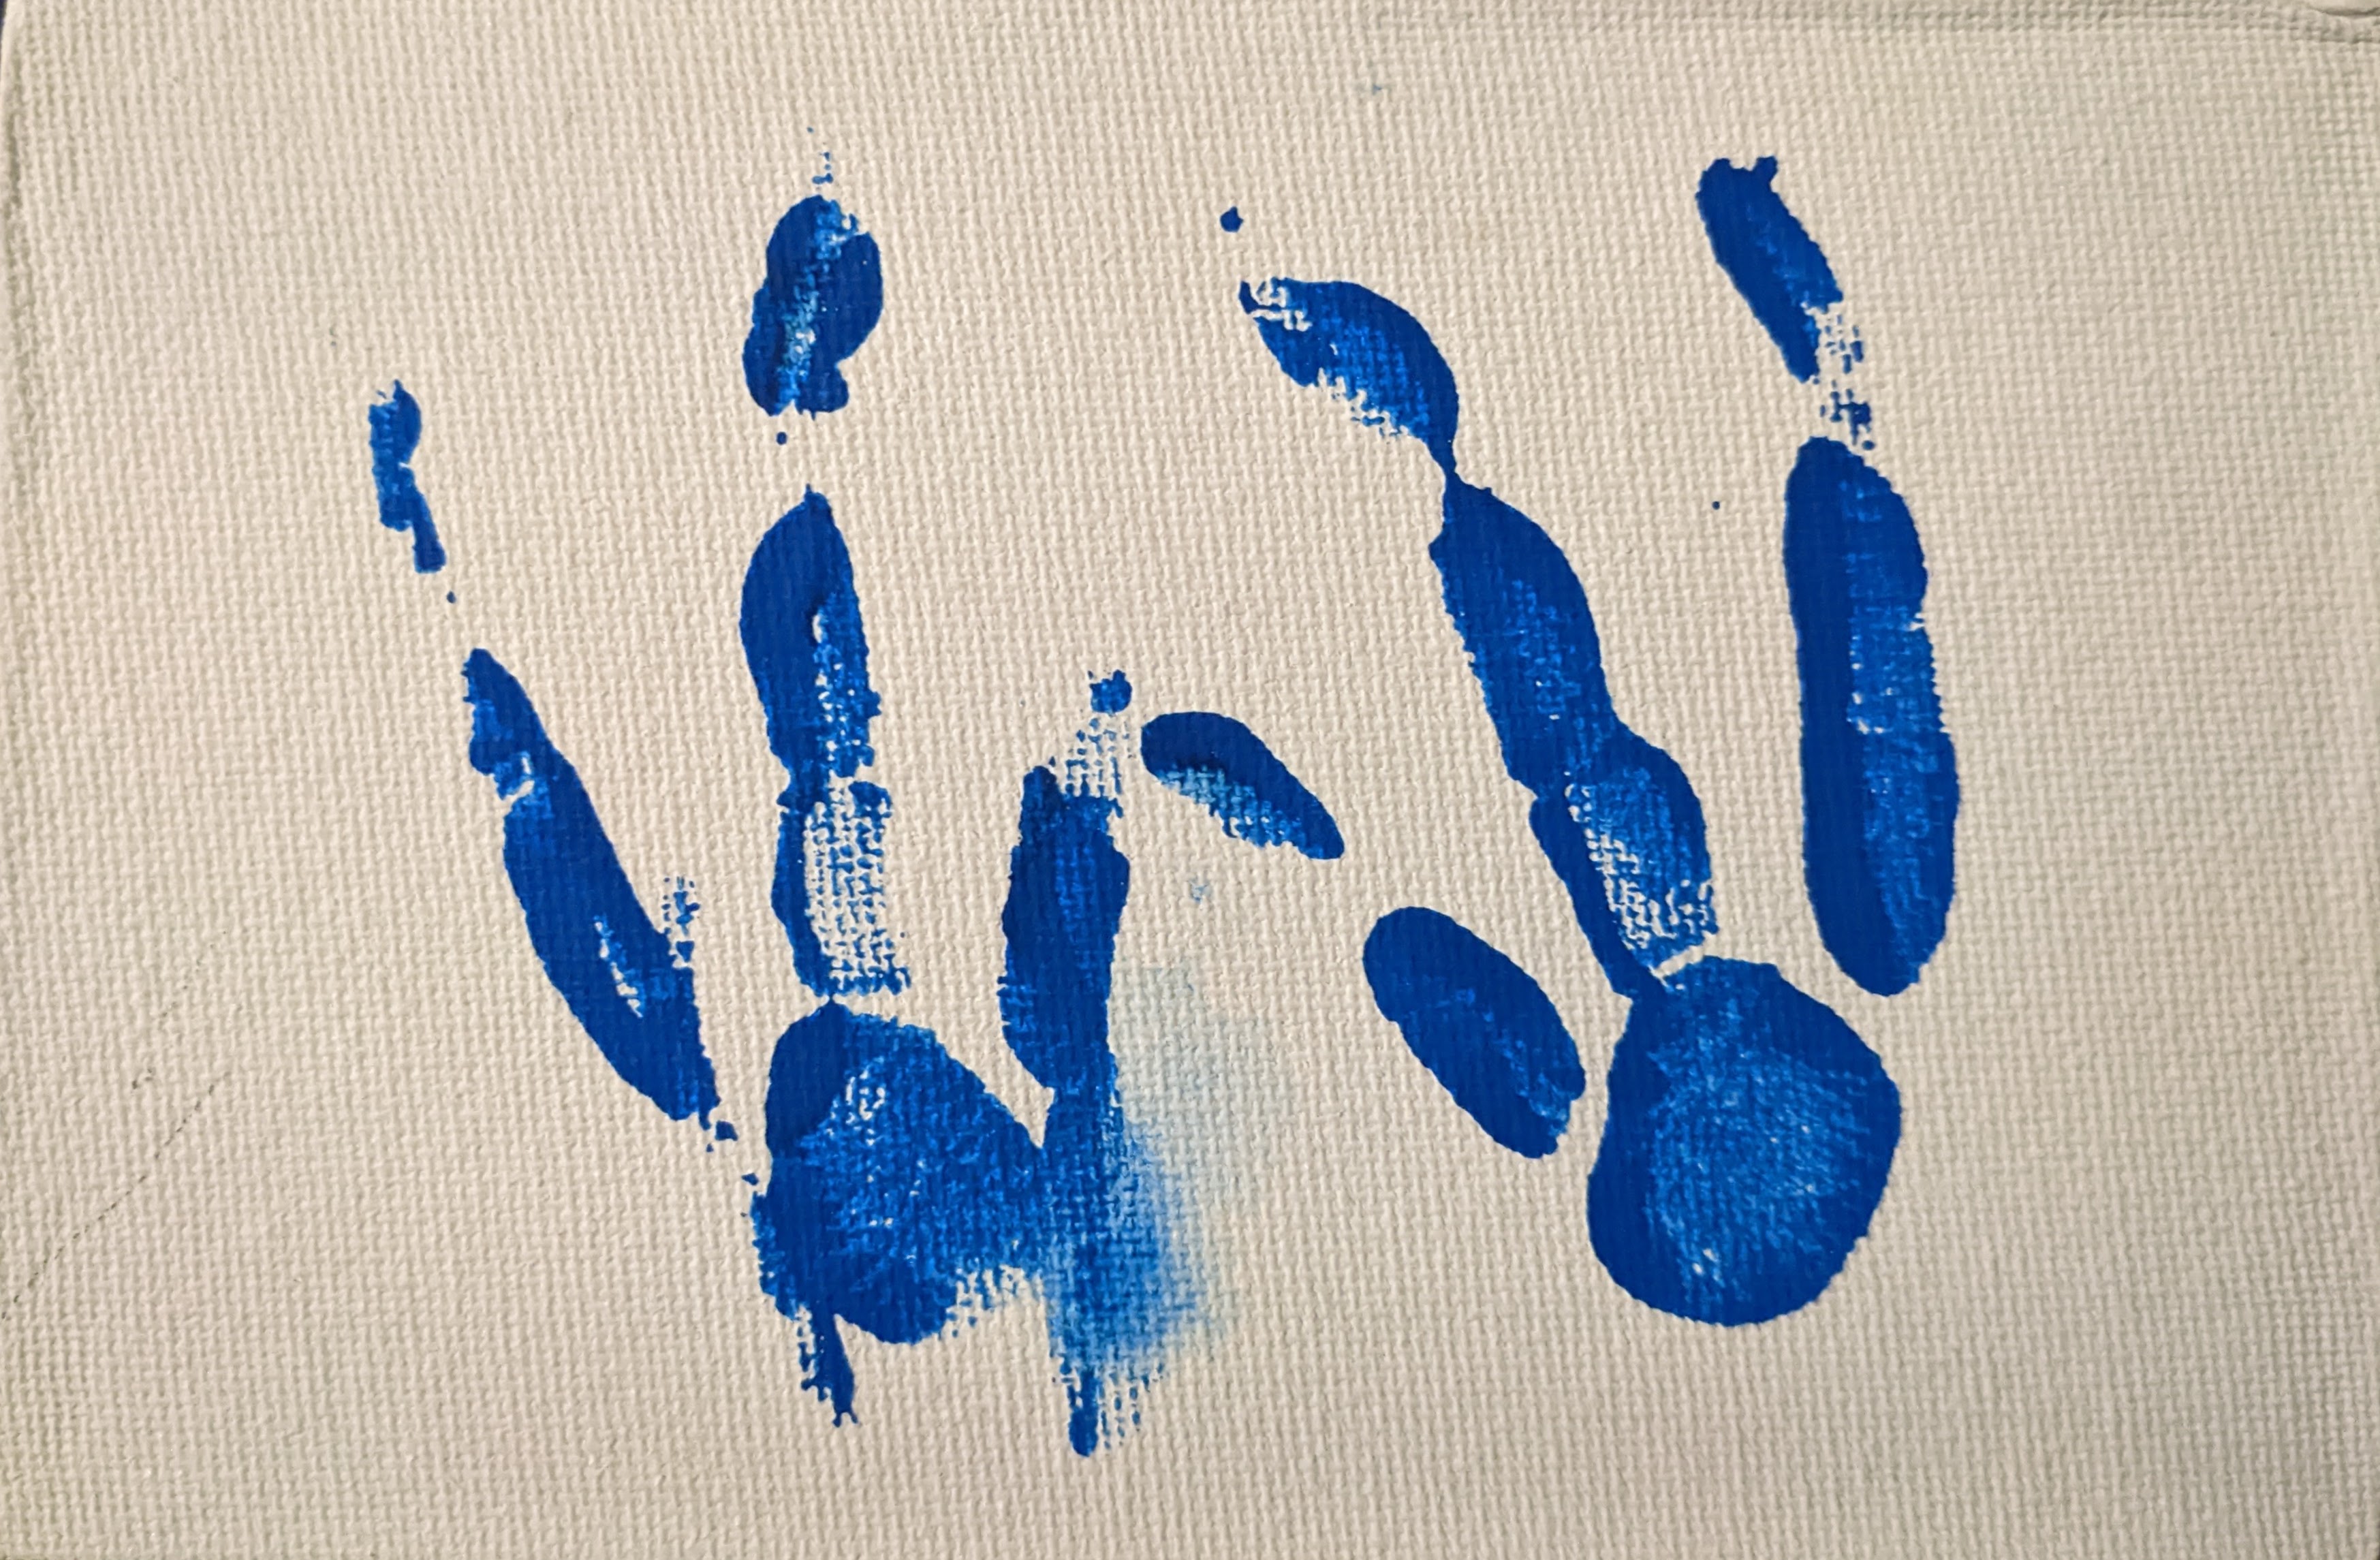 A white canvas shows a pair of animal footprints in blue paint. These are the footprints of a rockhopper penguin. Each foot has three toes.